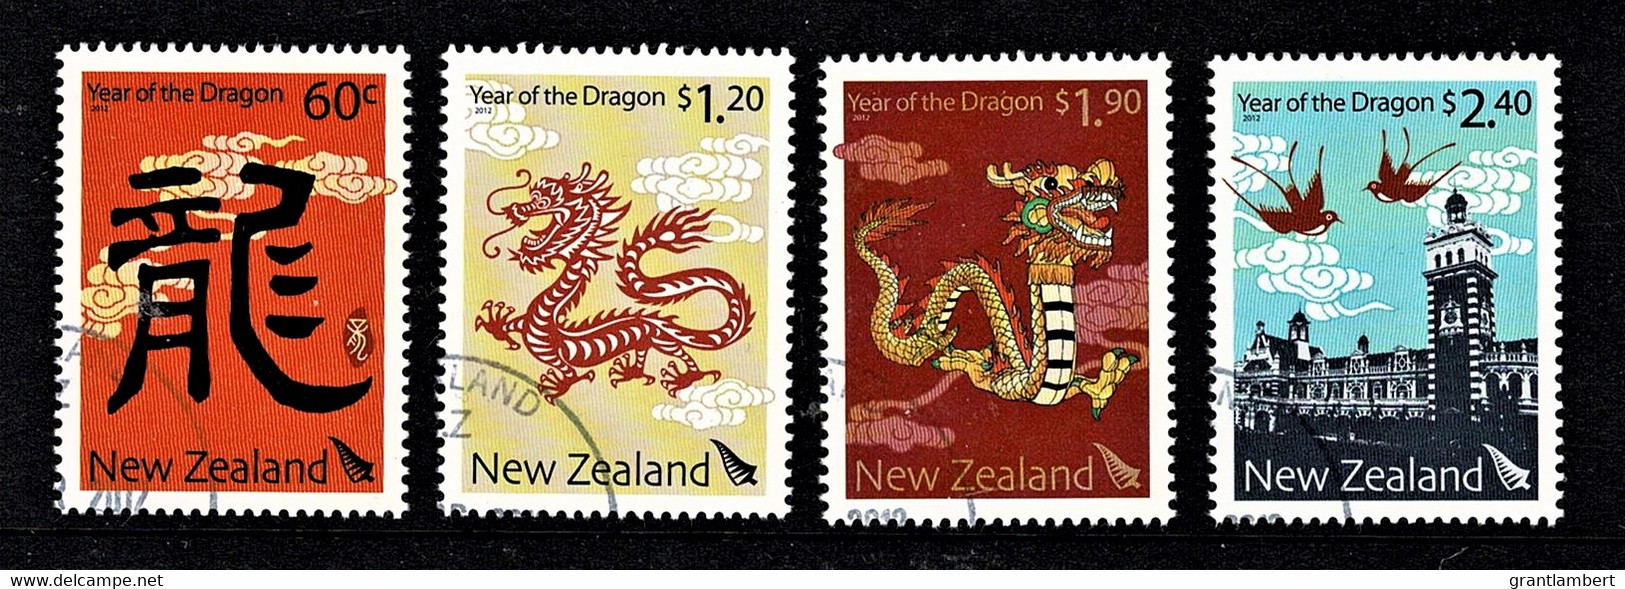 New Zealand 2012 Year Of The Dragon Set Of 4 Used - Used Stamps